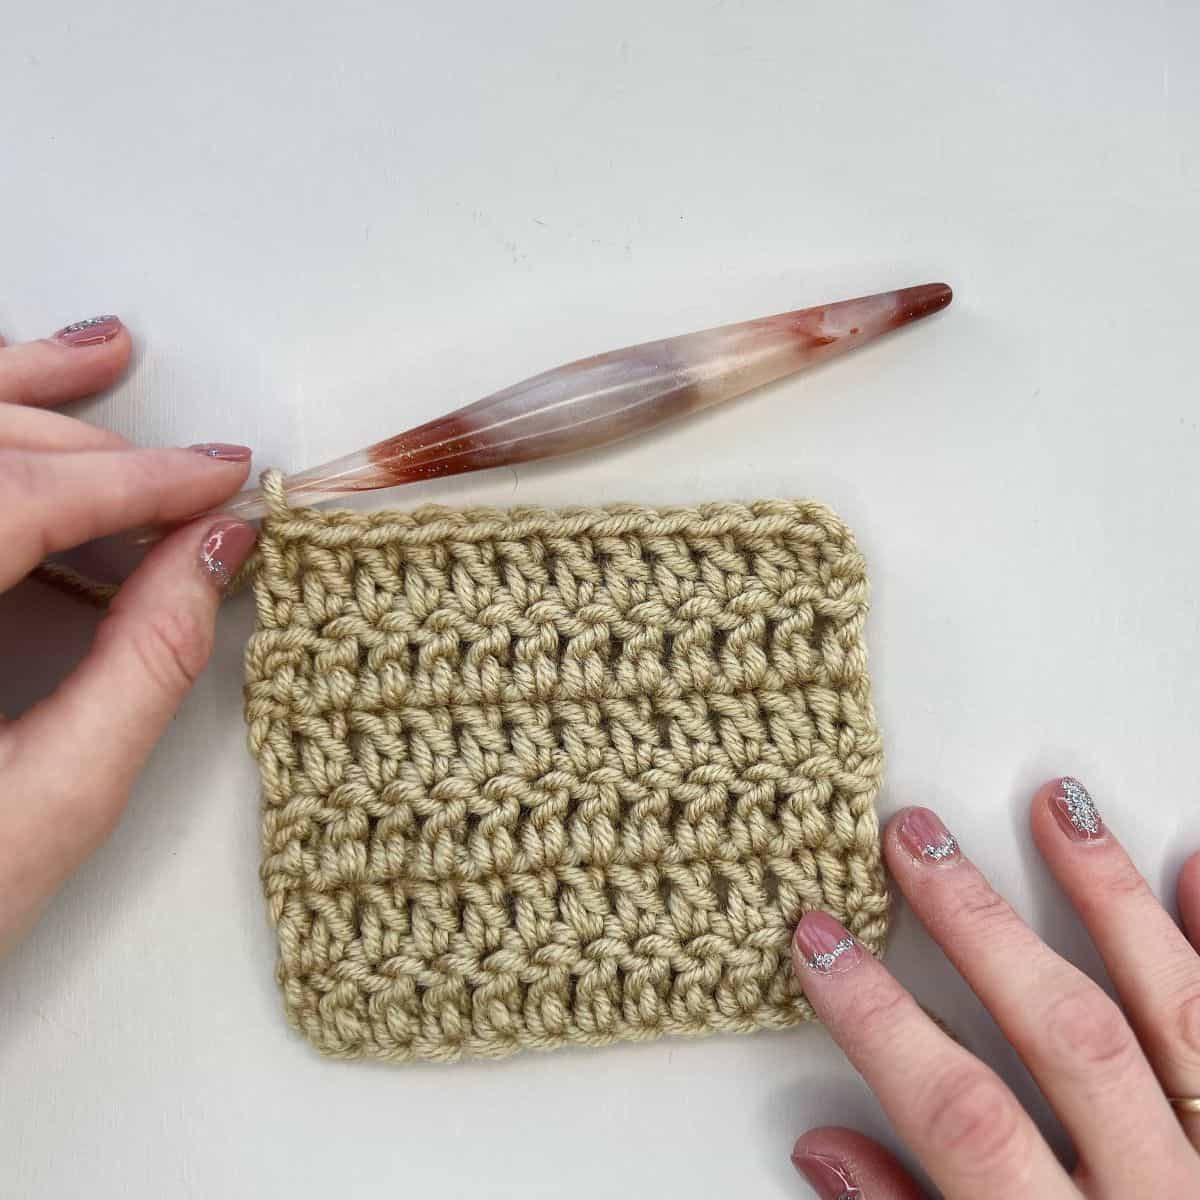 Image showing crochet swatch using stacked single crochet stitches.